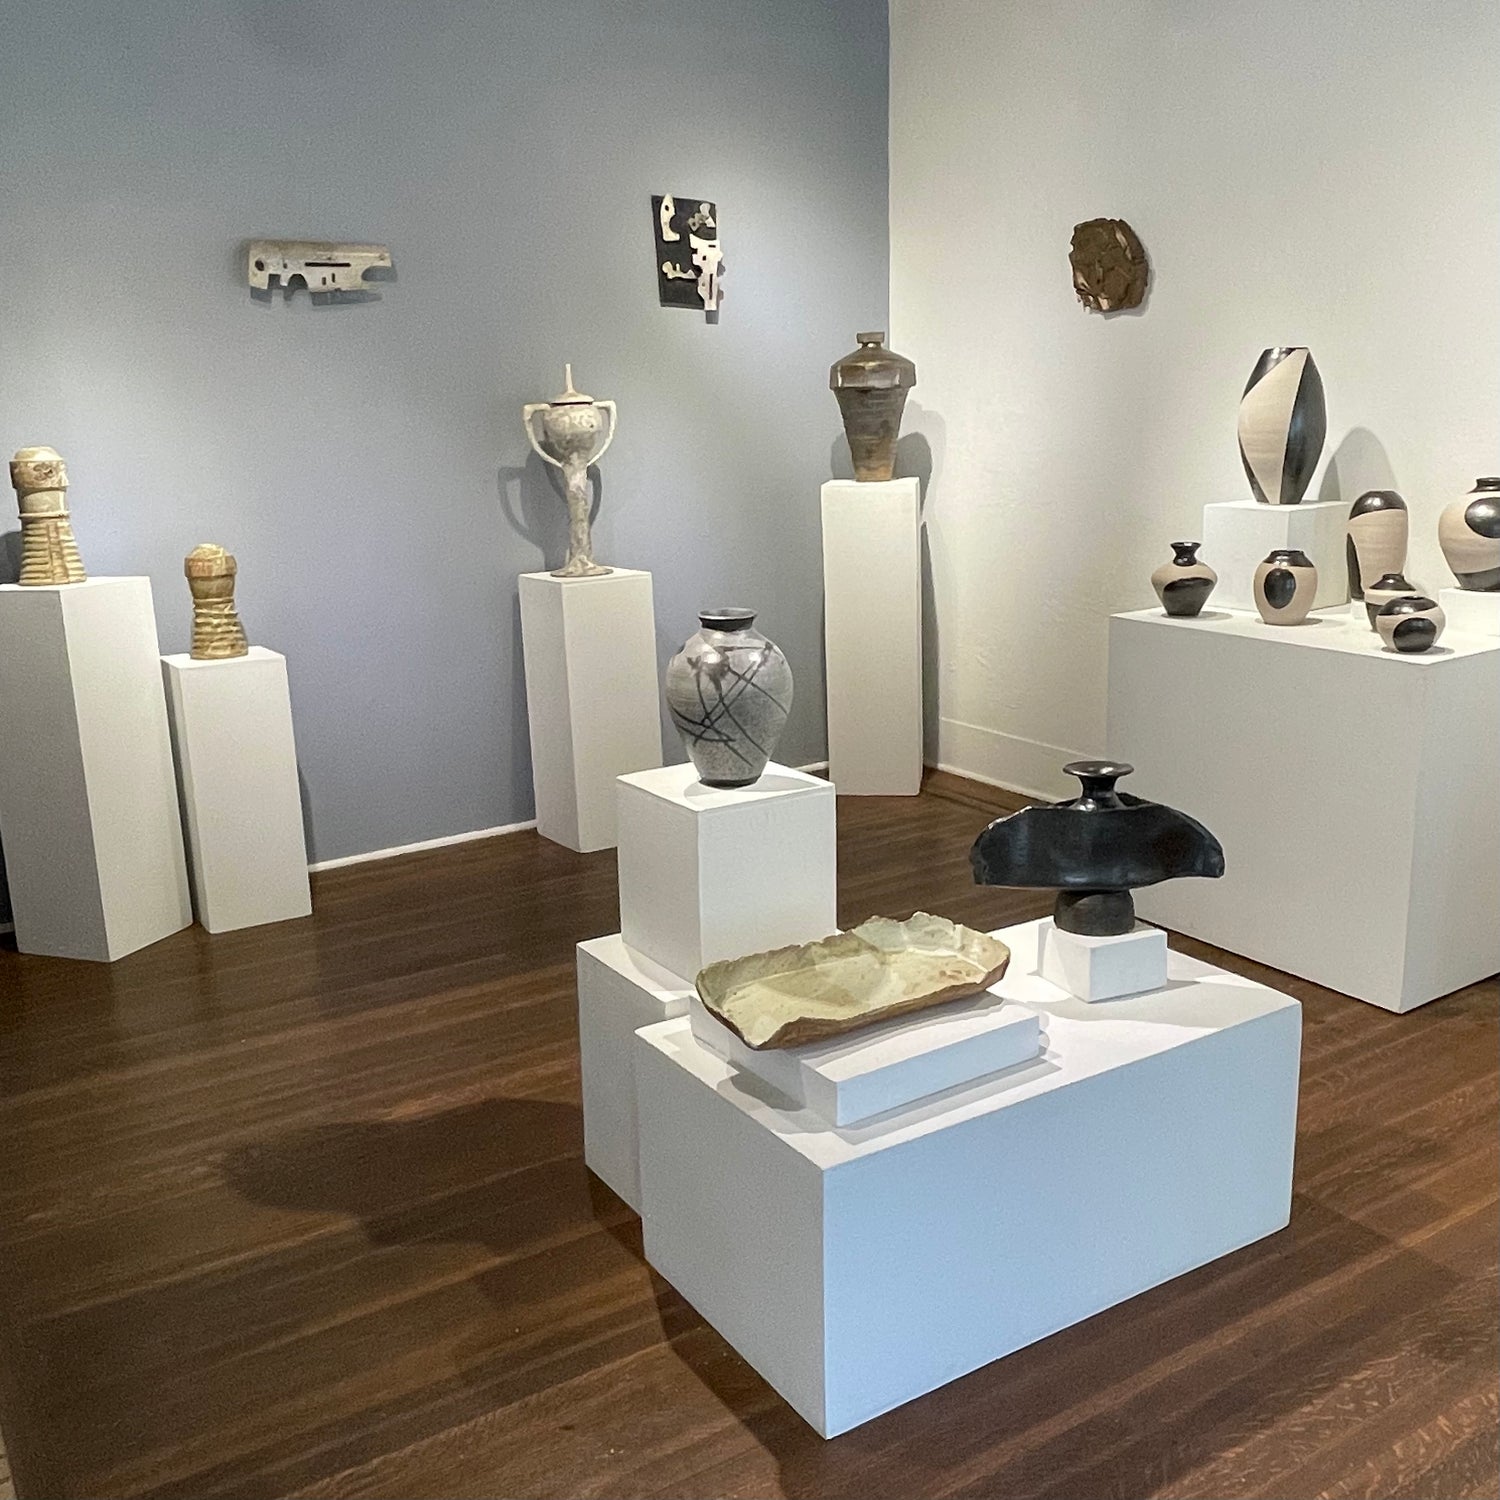 View of front gallery room with various ceramic pieces